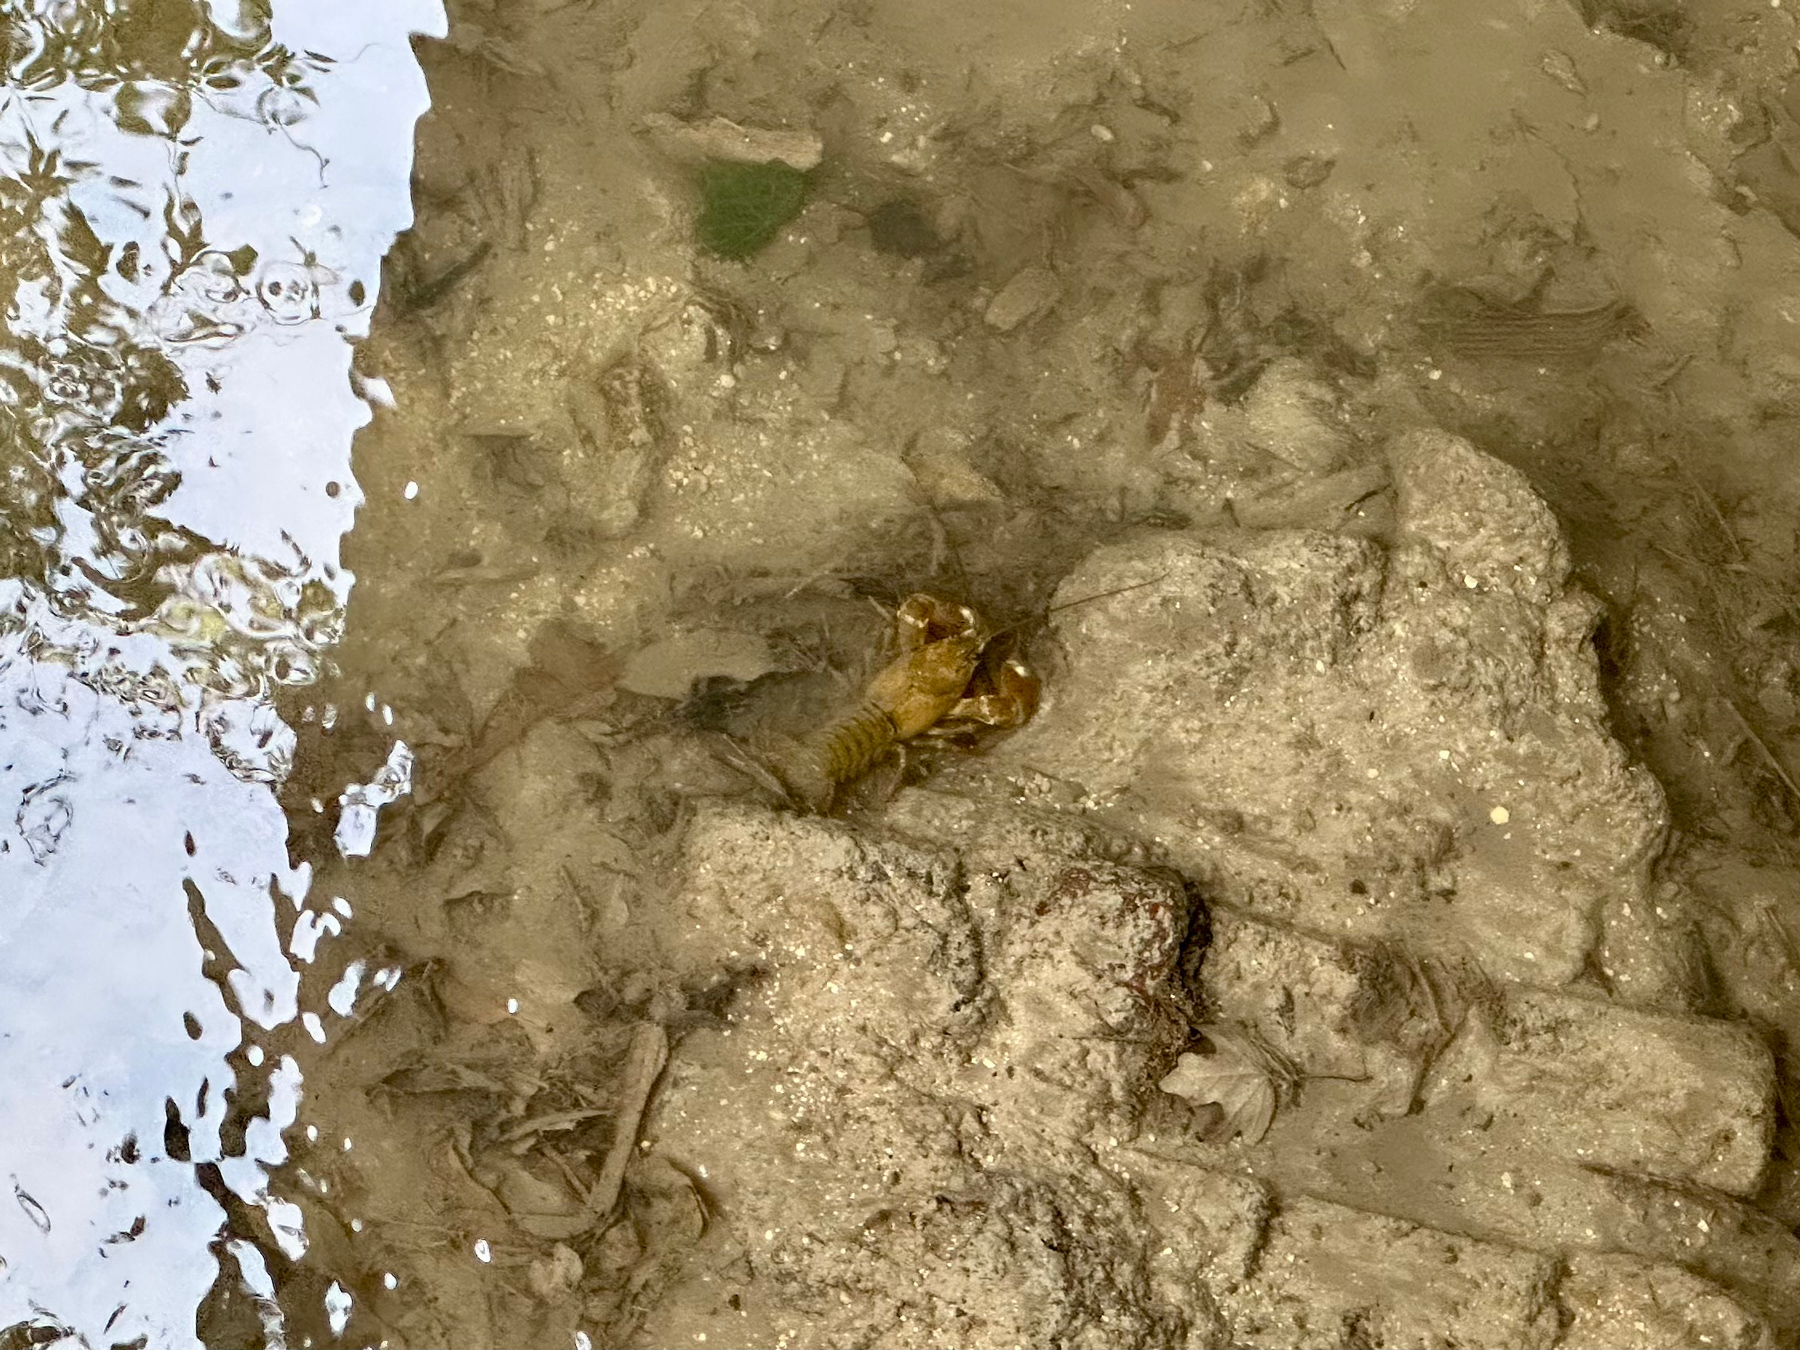 A crayfish visible at the bottom of a very clear stream.